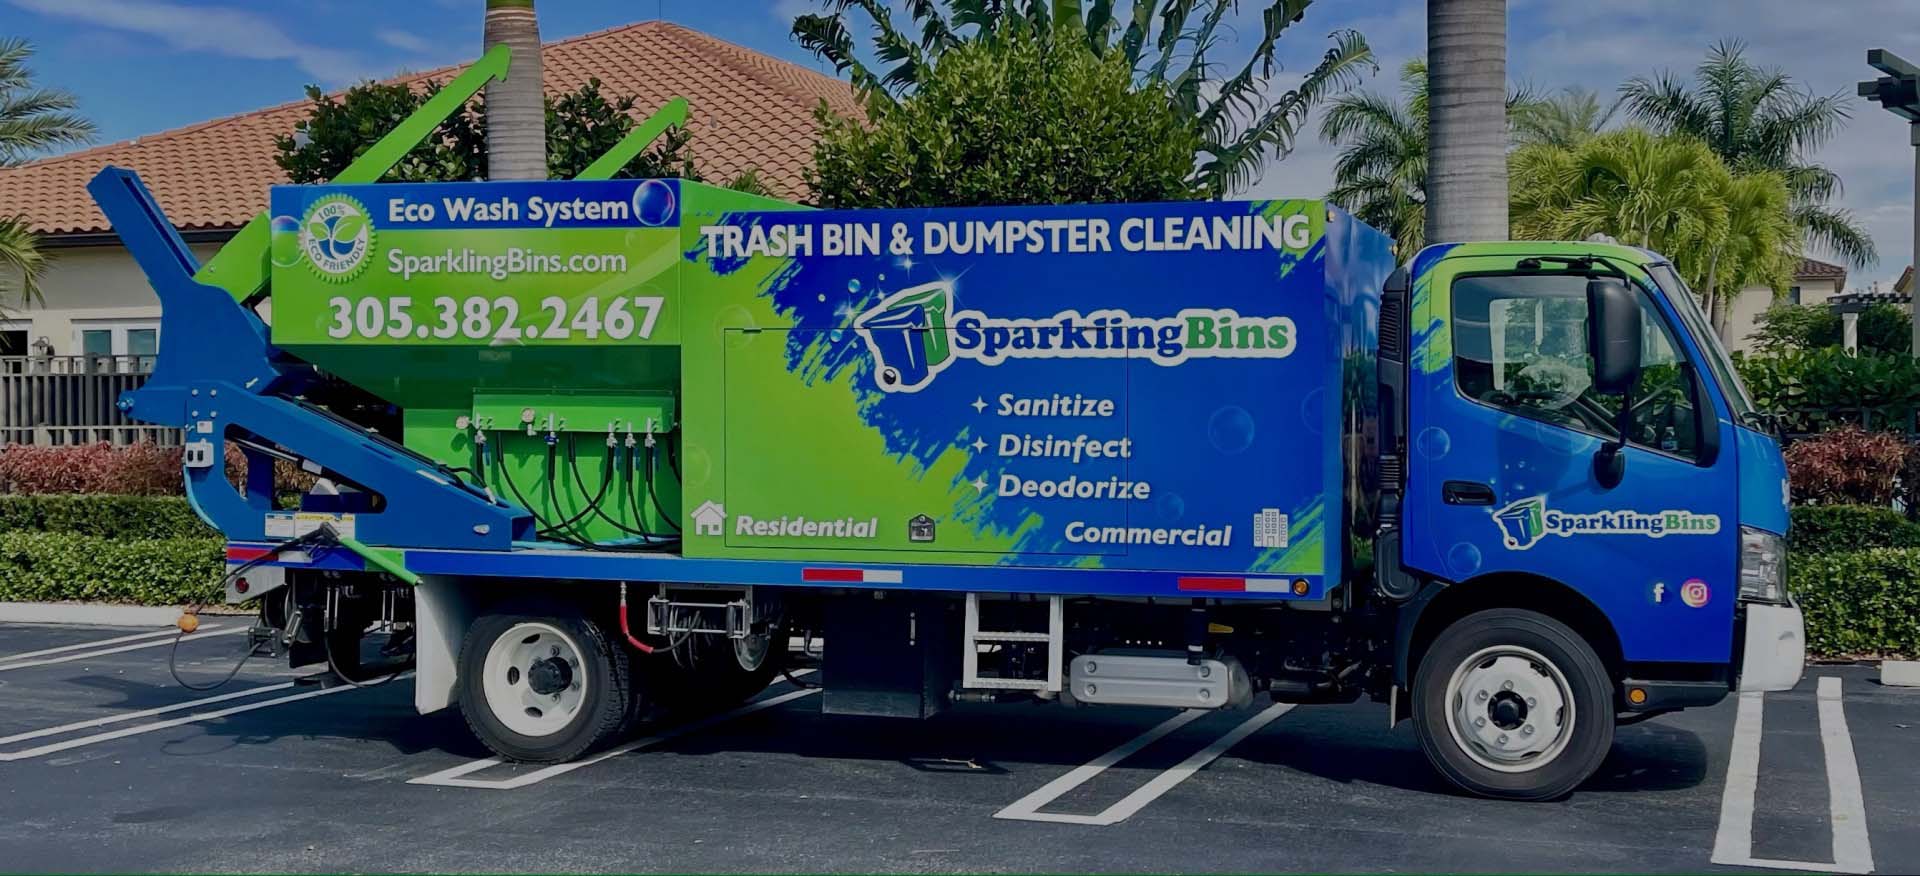 Residential vs. Commercial Bin Cleaning Services